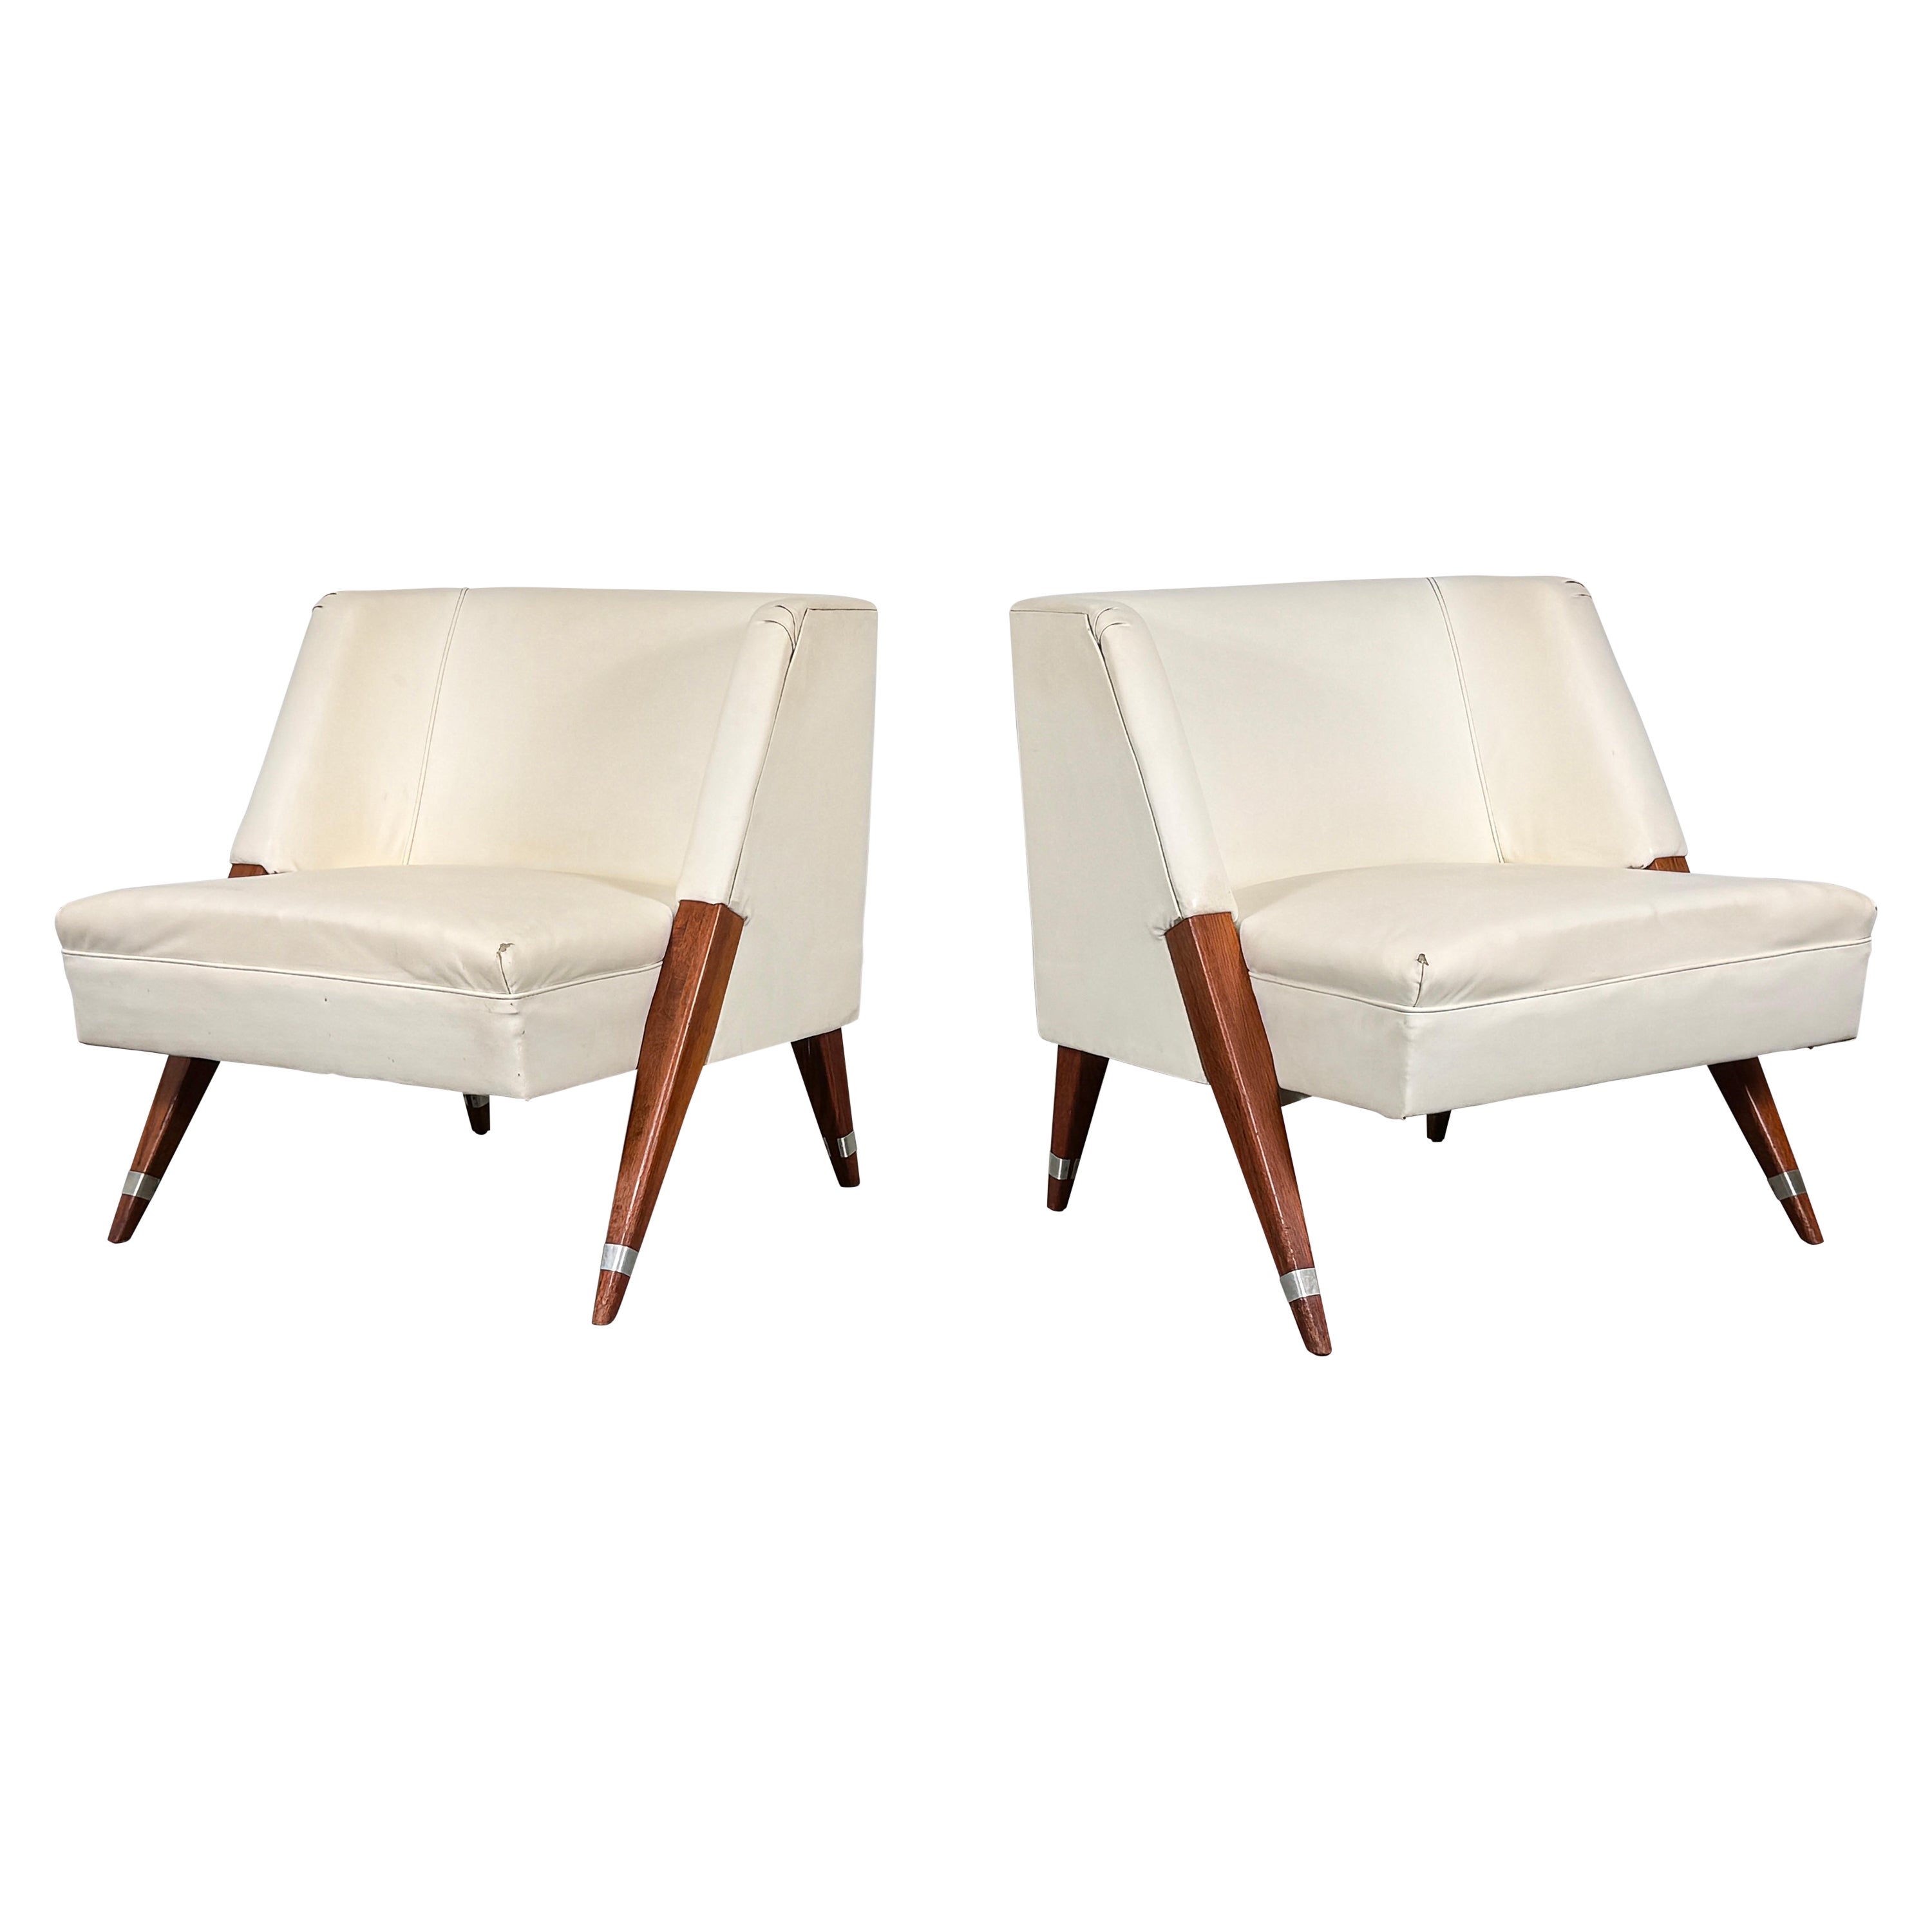 Pair Mid Century Modern Walnut Lounge Chairs In the Style of Gio Ponti 1950s For Sale